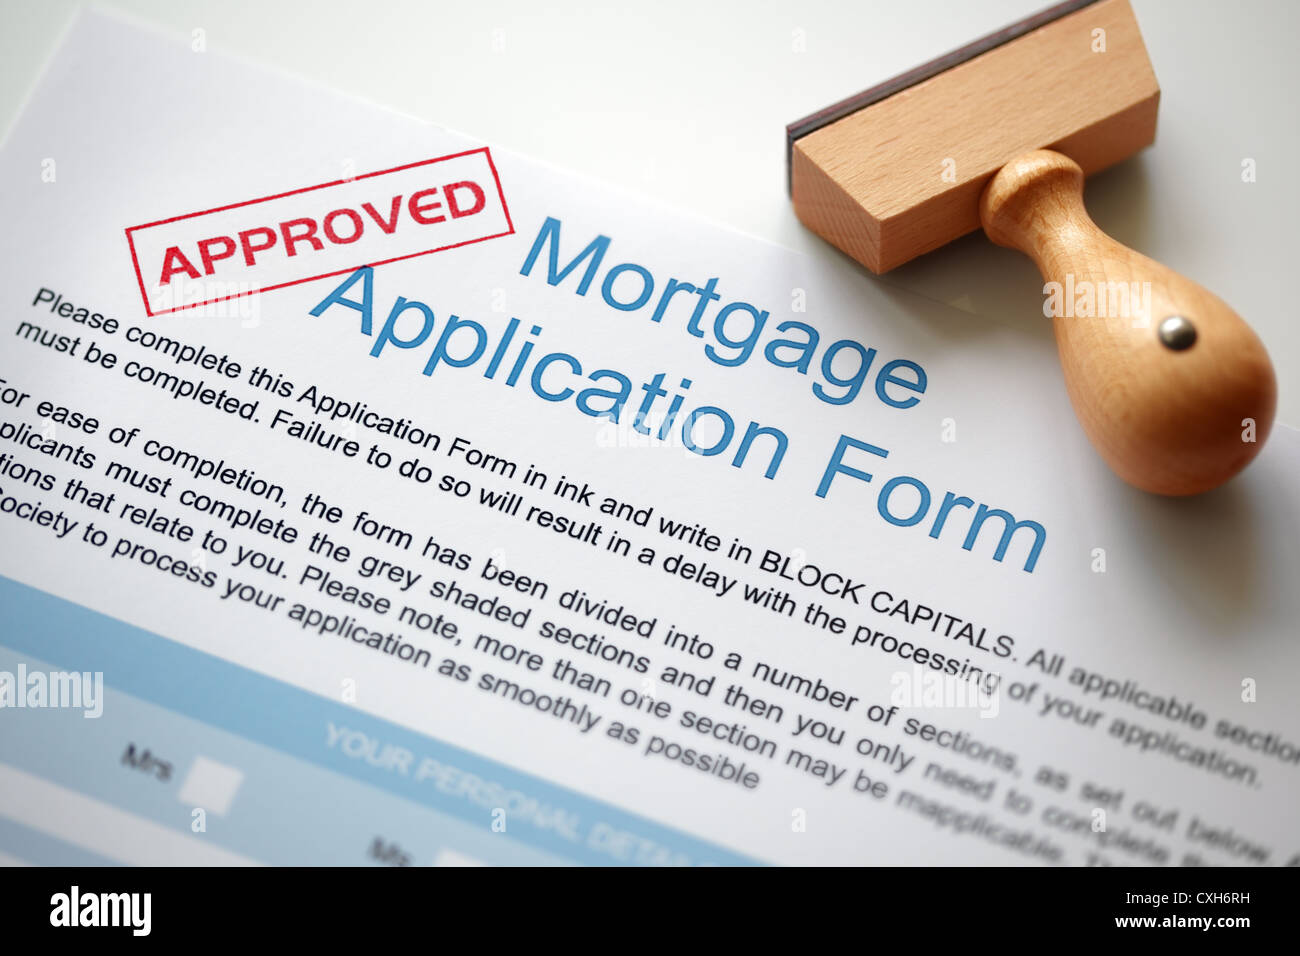 Approved mortgage application Stock Photo